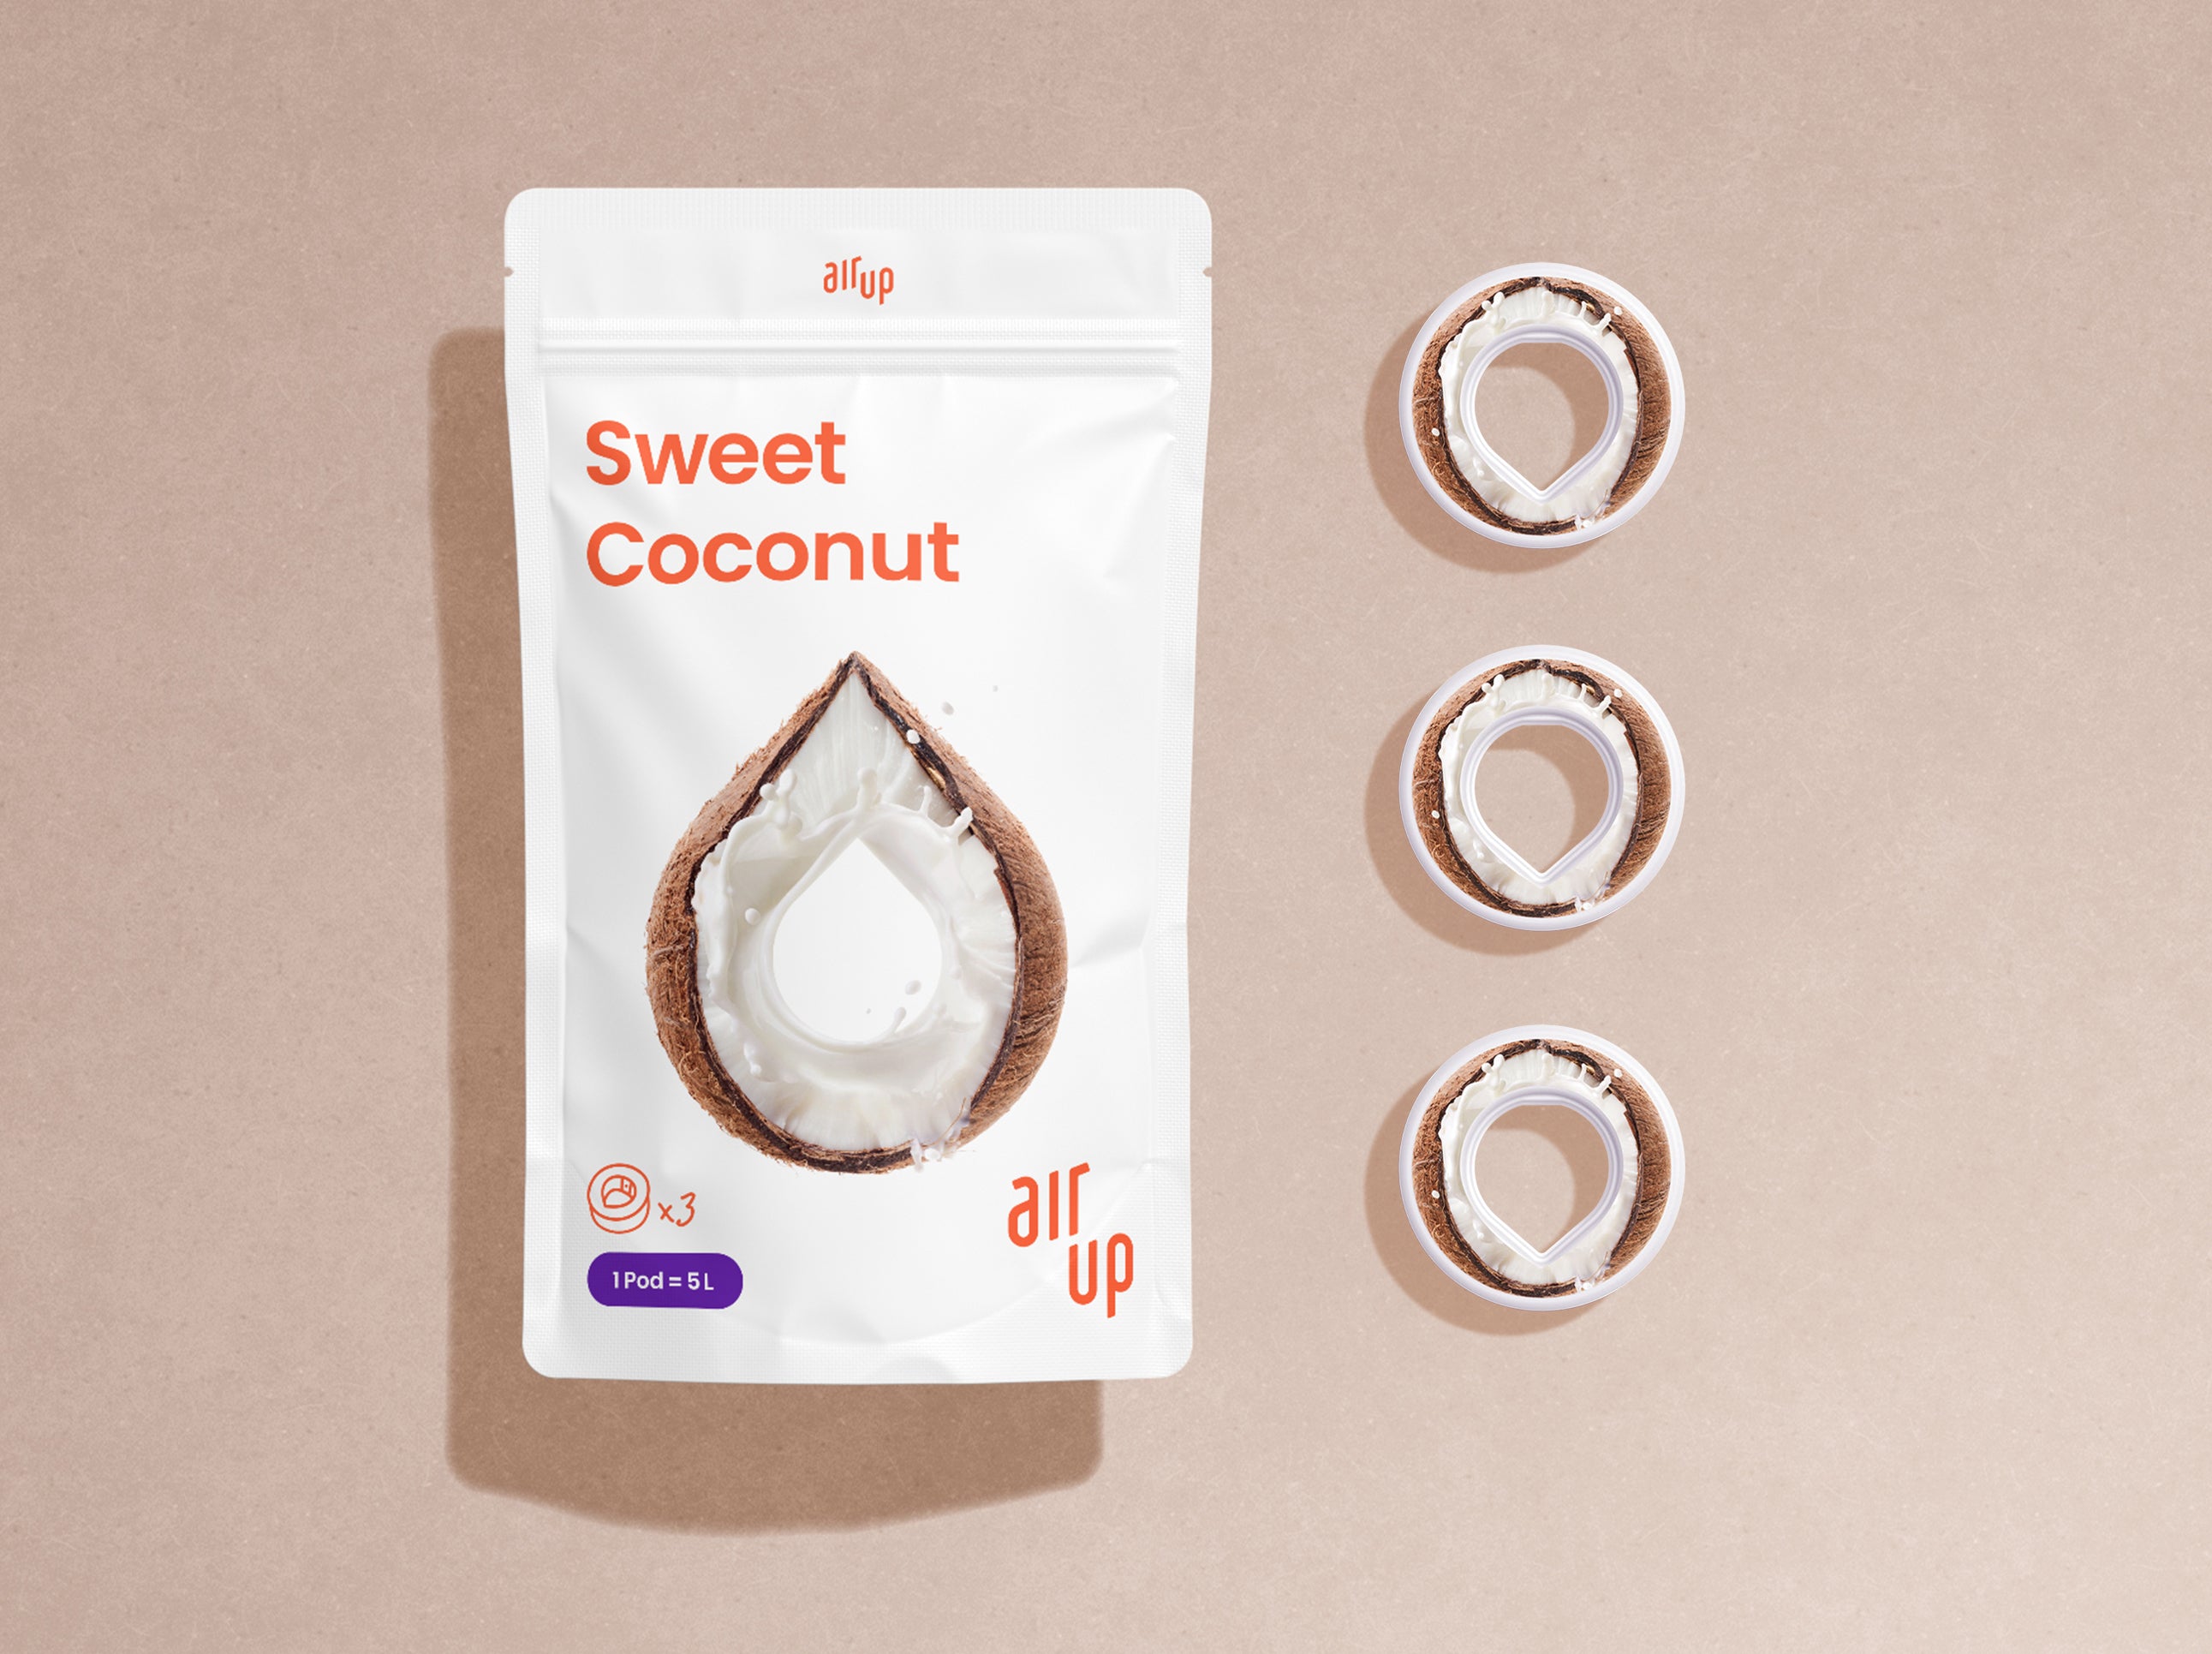 https://cdn.shopify.com/s/files/1/0063/9834/5280/products/PDP_Pouches_Pods_Sweet_Coconut_NoPremiumTag.jpg?v=1677594876